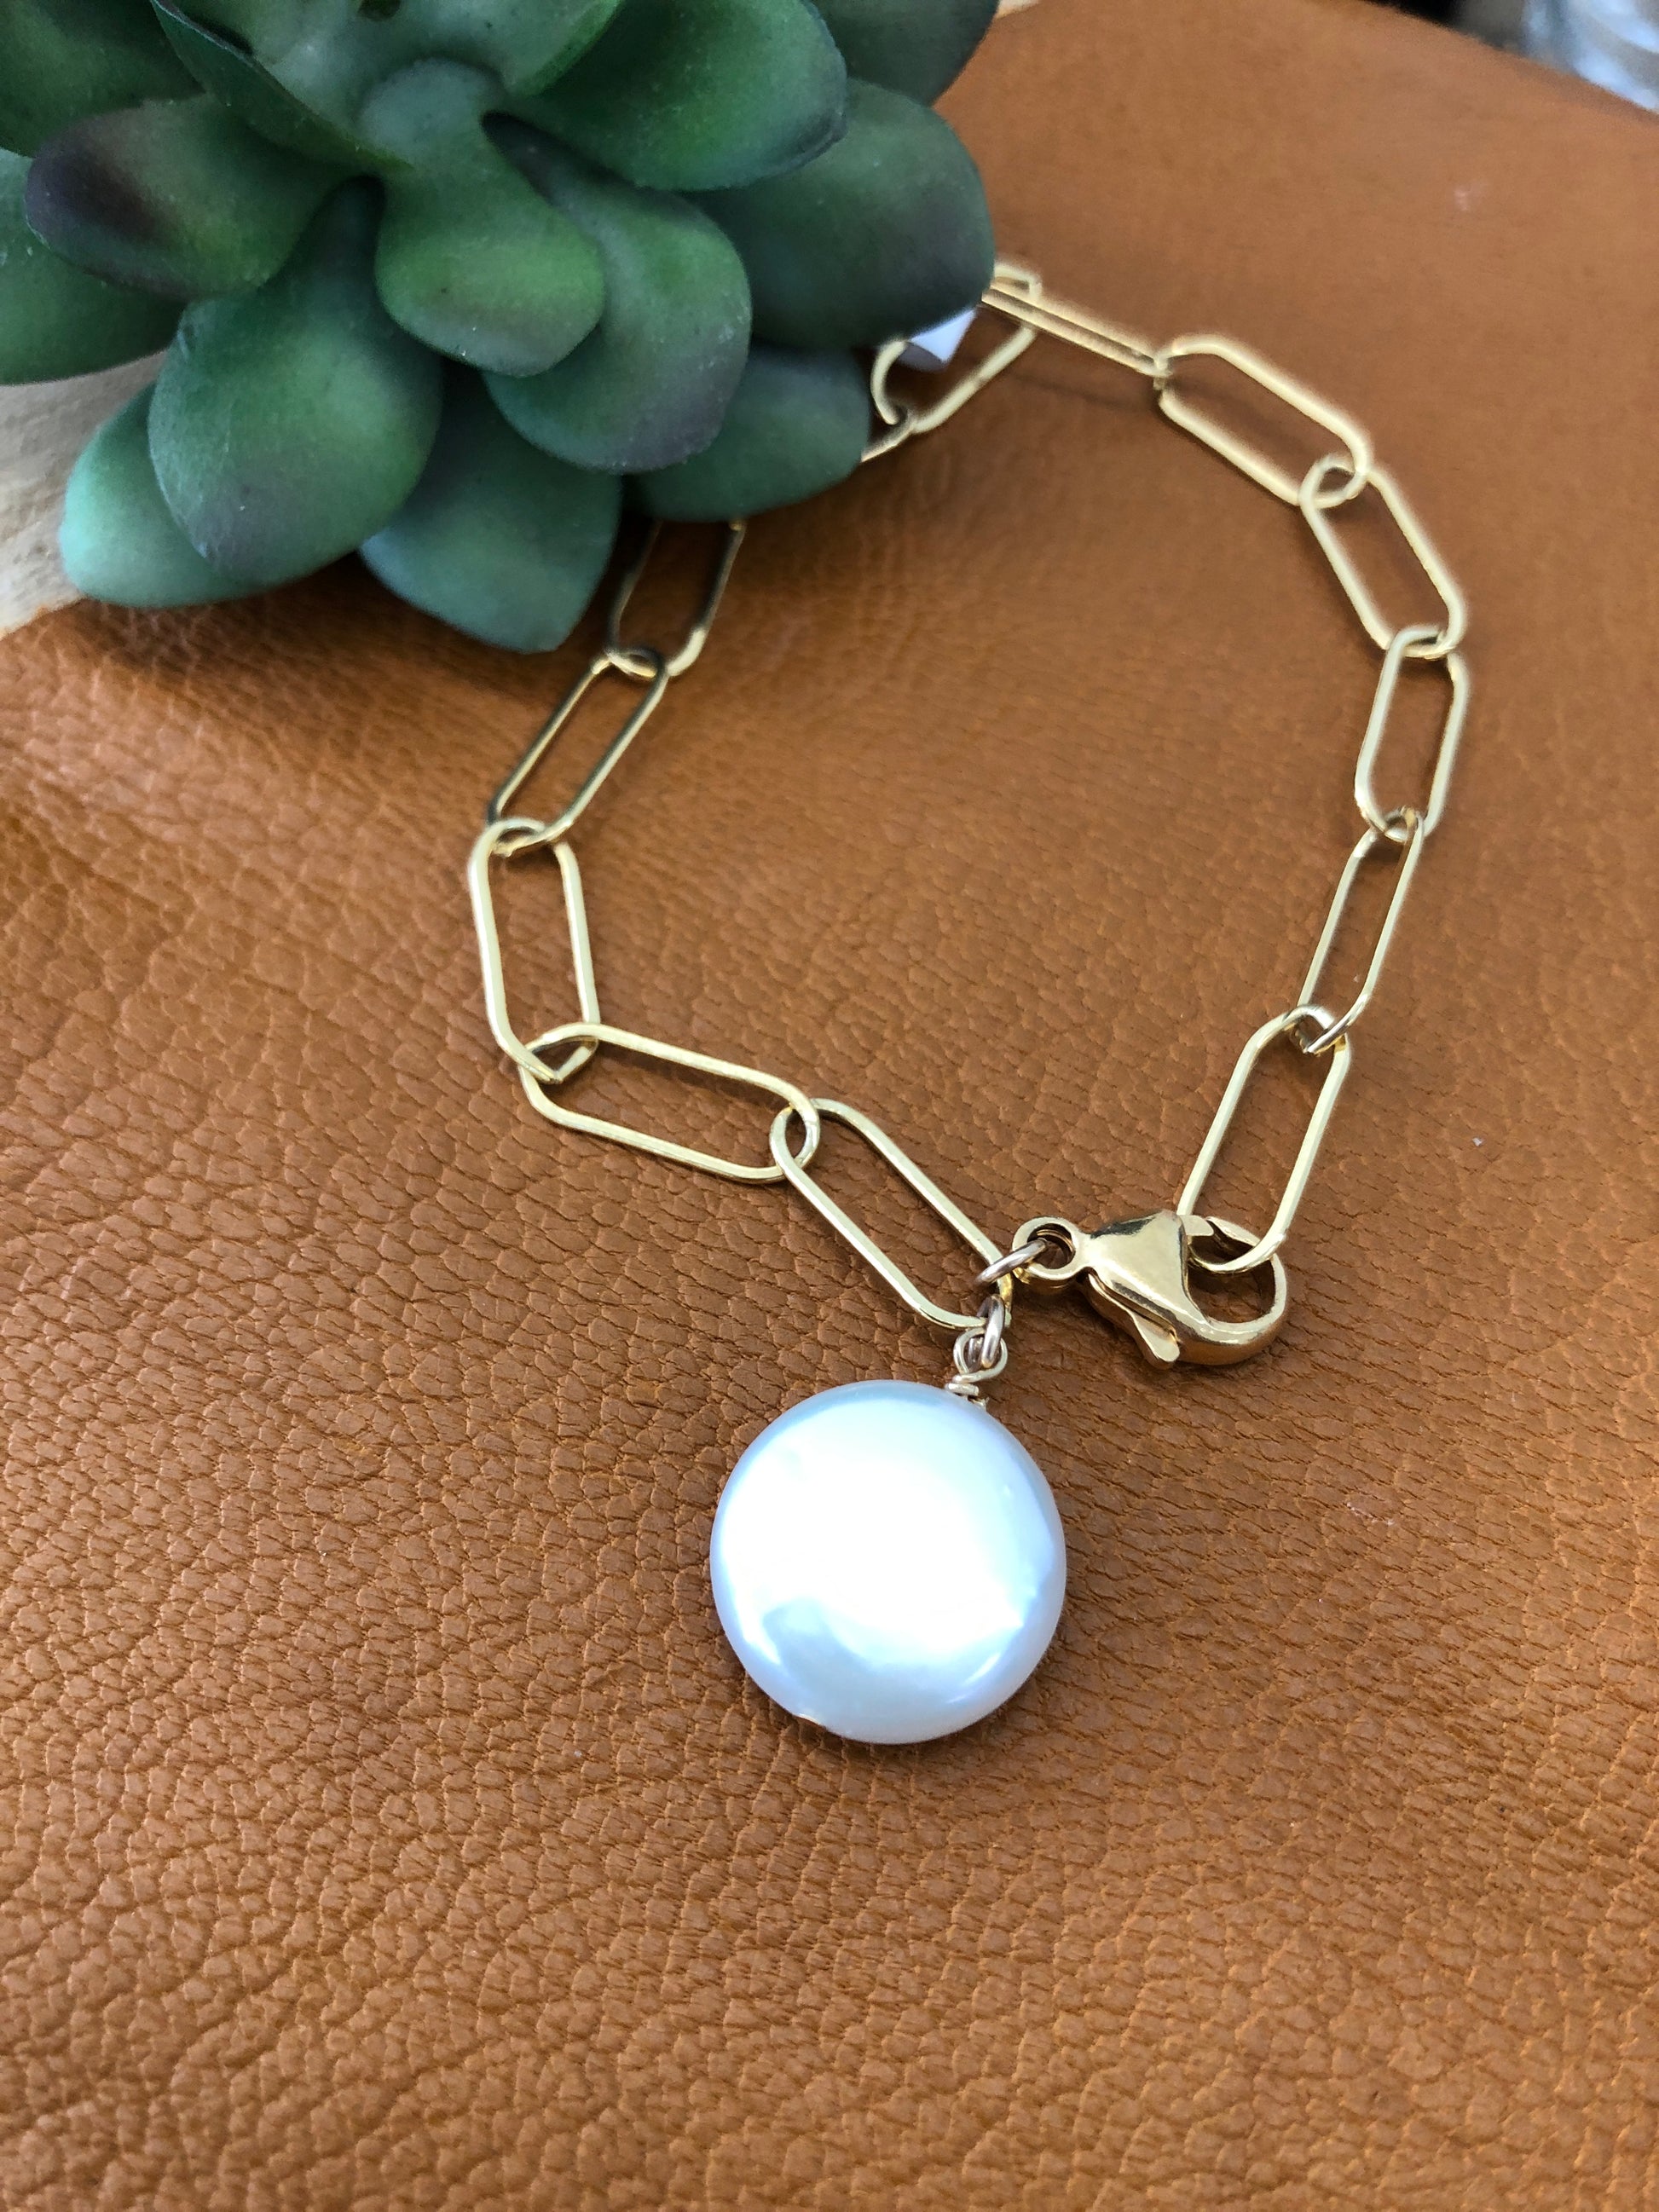 A 14k gold filled paper clip chain bracelet with a “larger than life” freshwater pearl coin lays on a brown leather piece with faux succulent sneaking from the left corner.